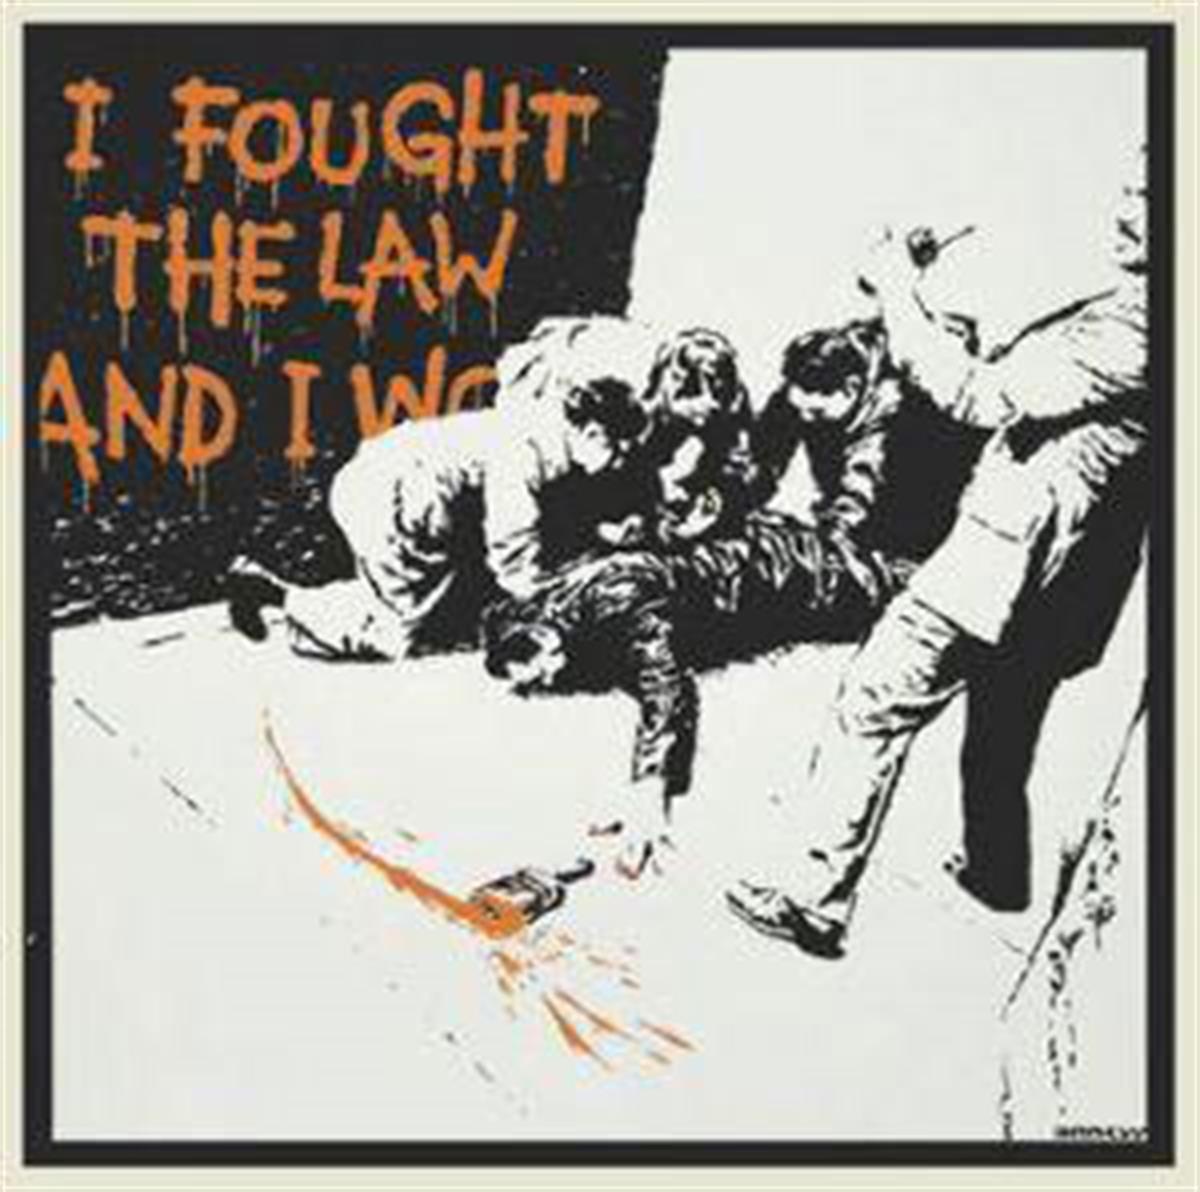 Banksy's 'I Fought The Law'